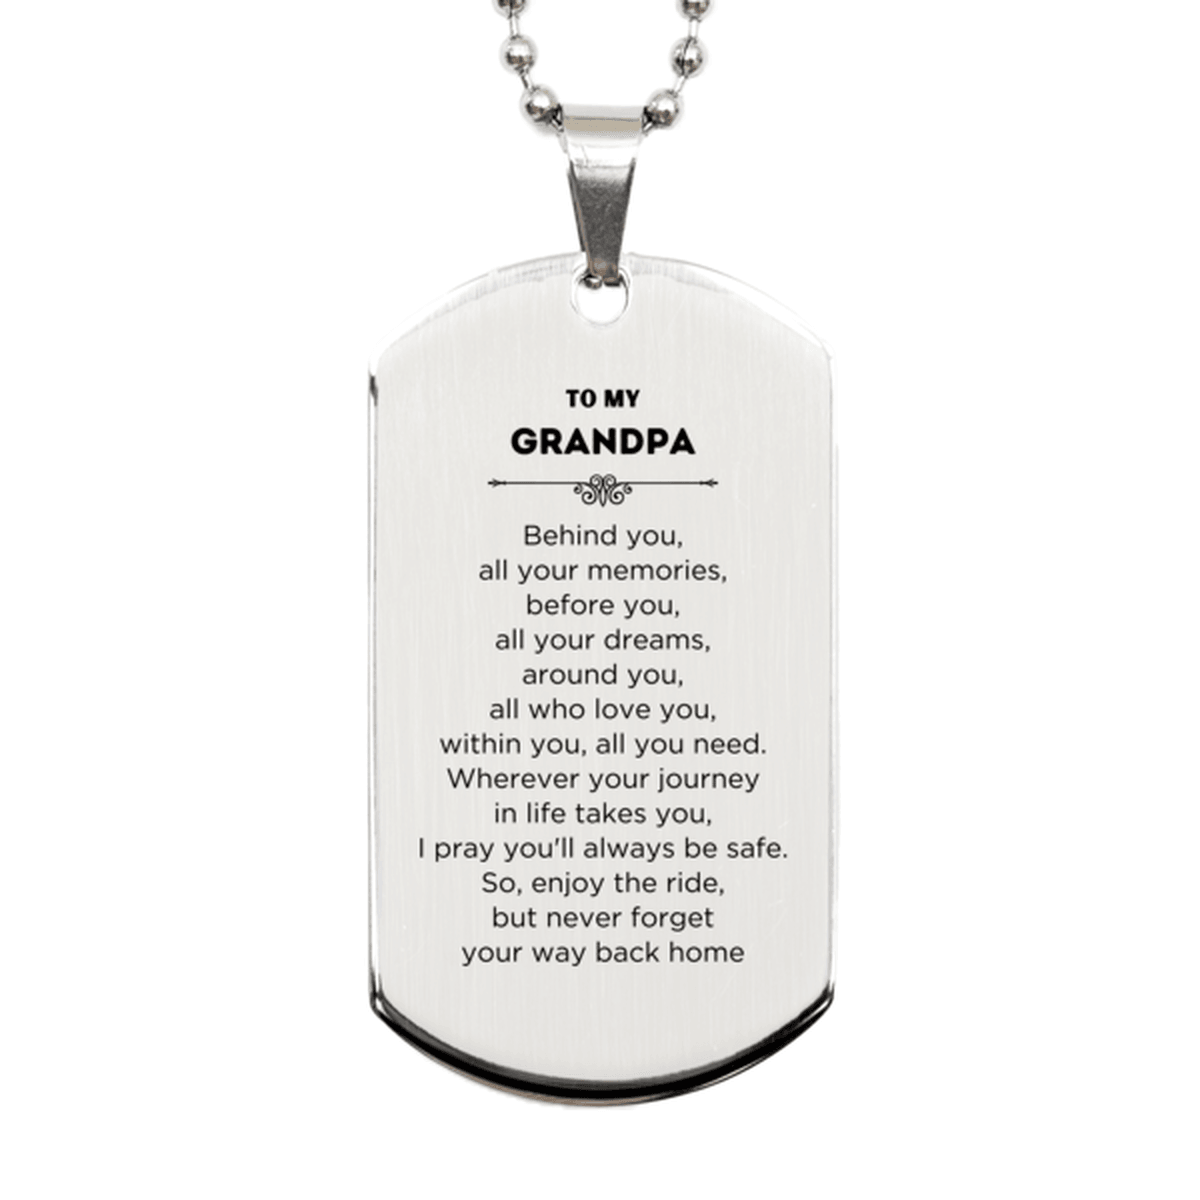 Grandpa Silver Dog Tag SentimBirthday Christmas Unique Gifts Behind you, all your memories, before you, all your dreams - Mallard Moon Gift Shop